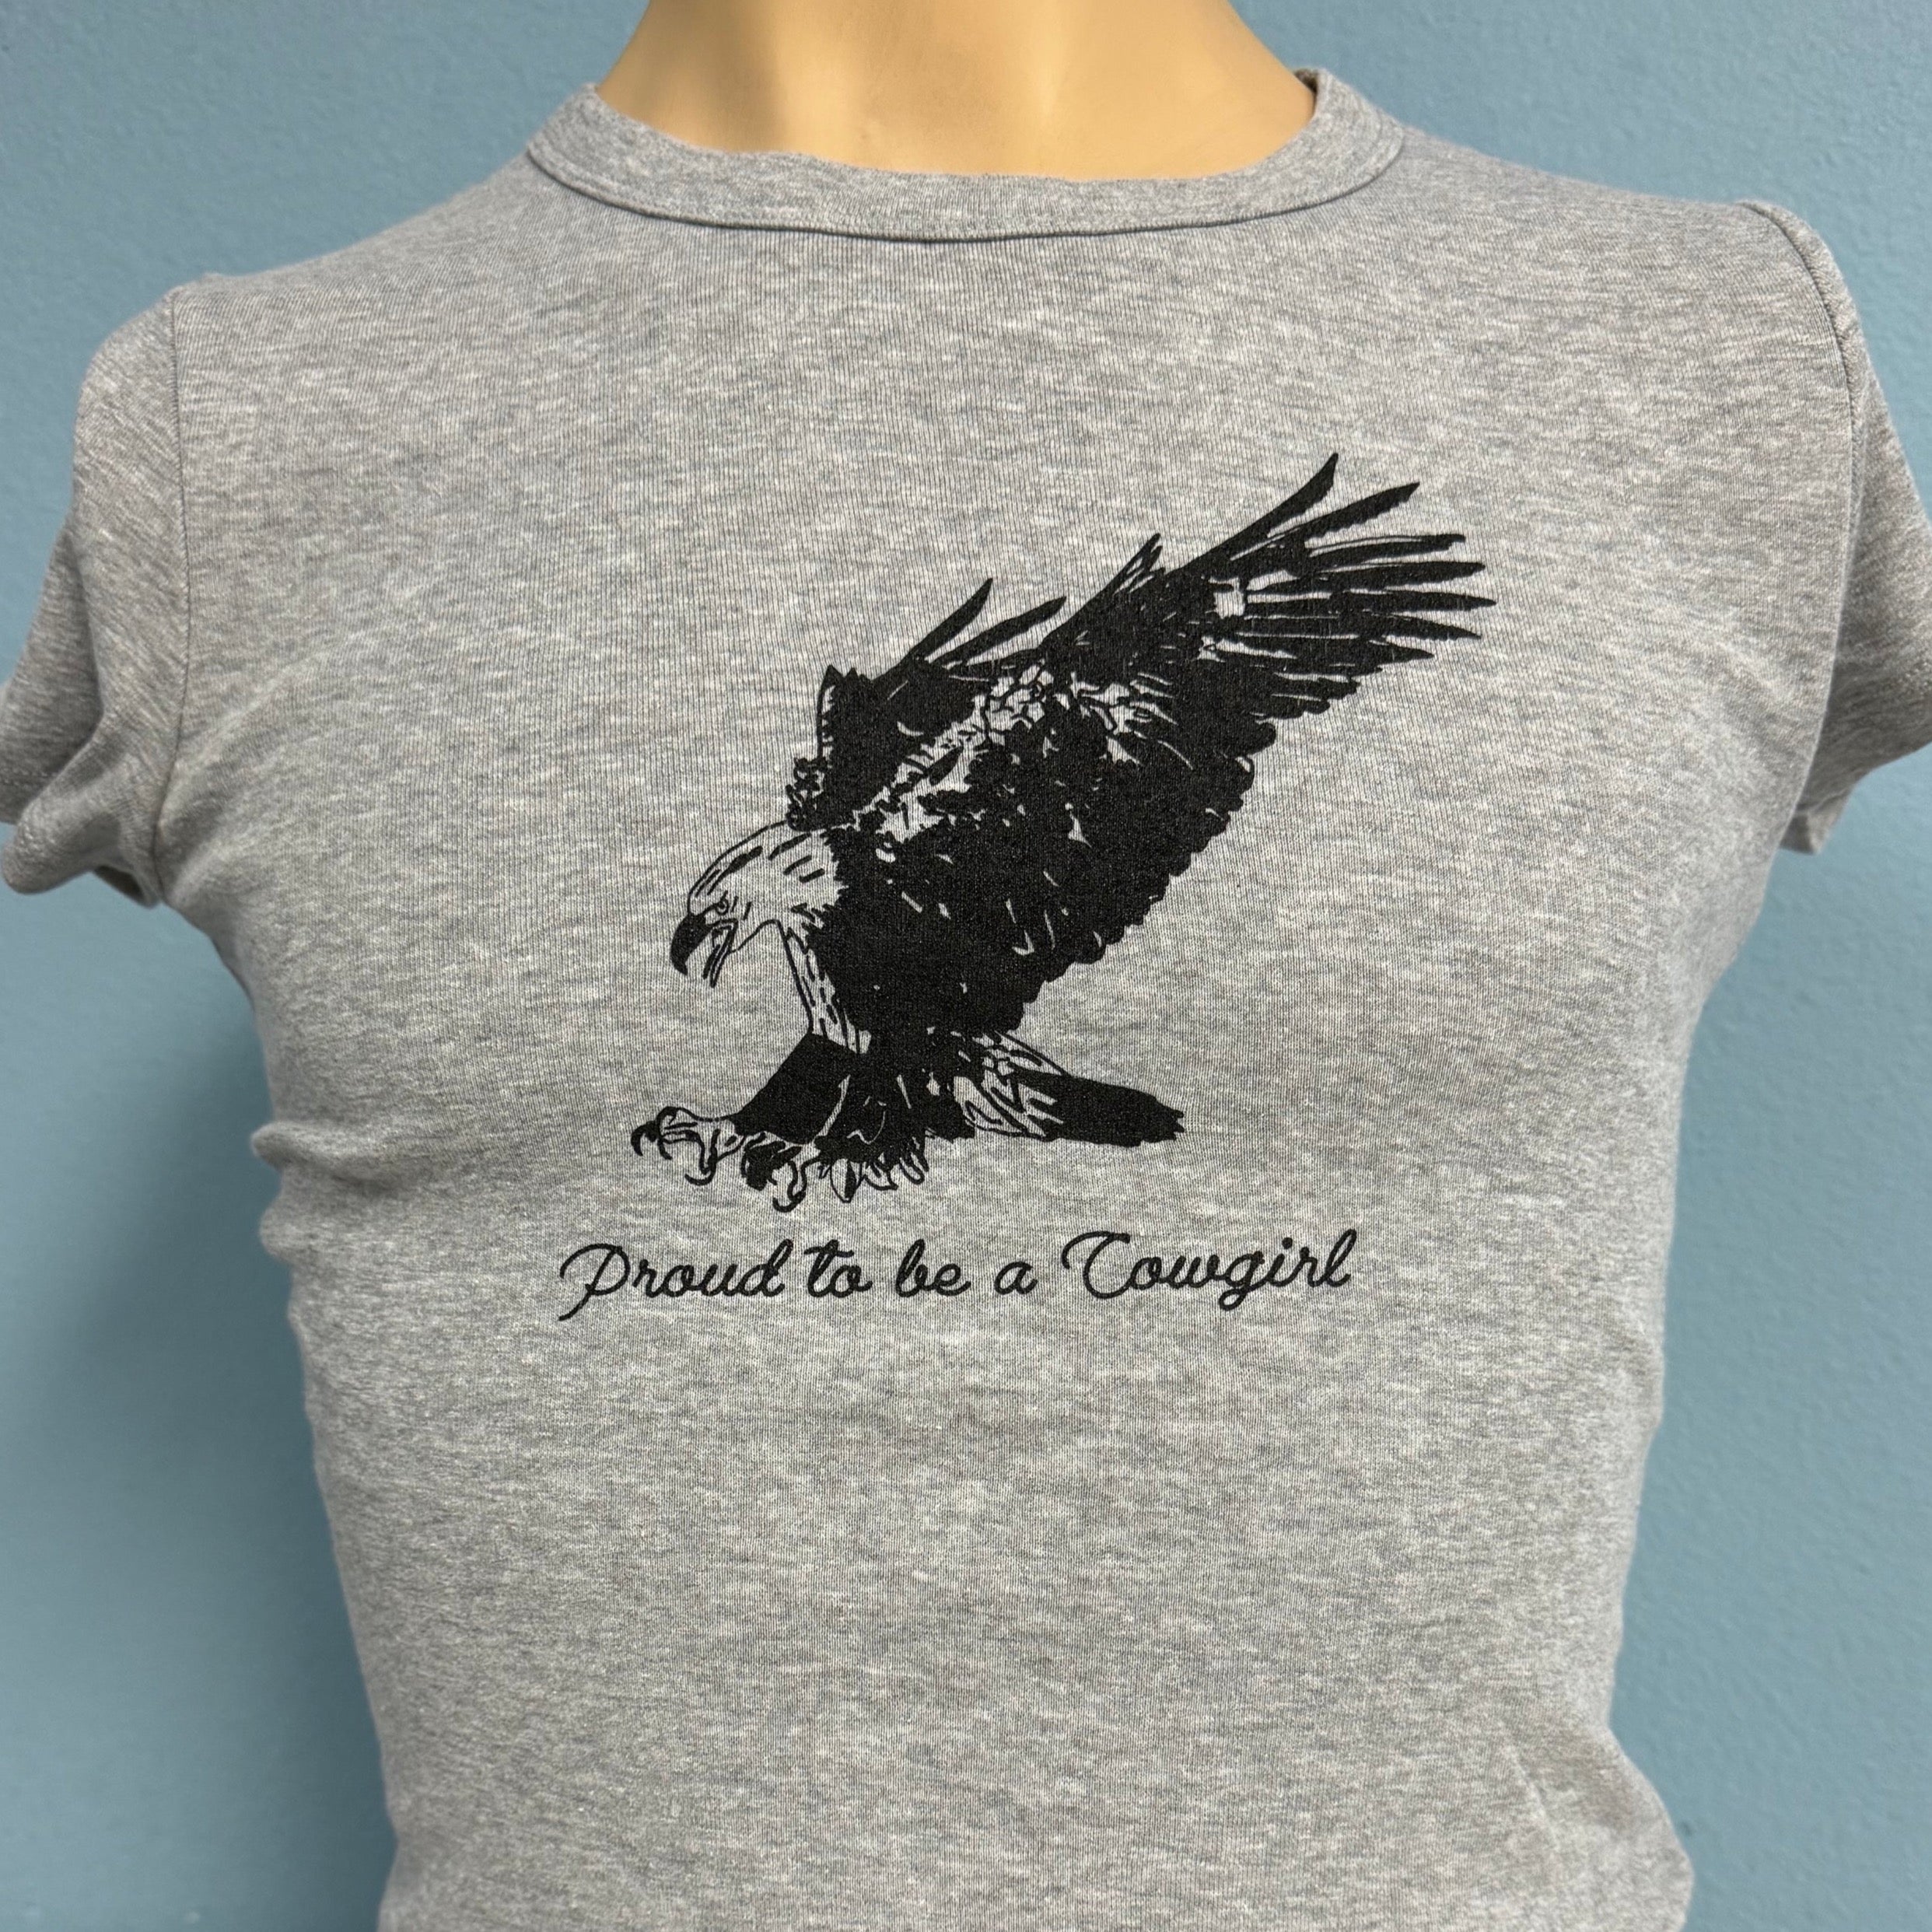 “Proud to be a Cowgirl” Eagle Tee